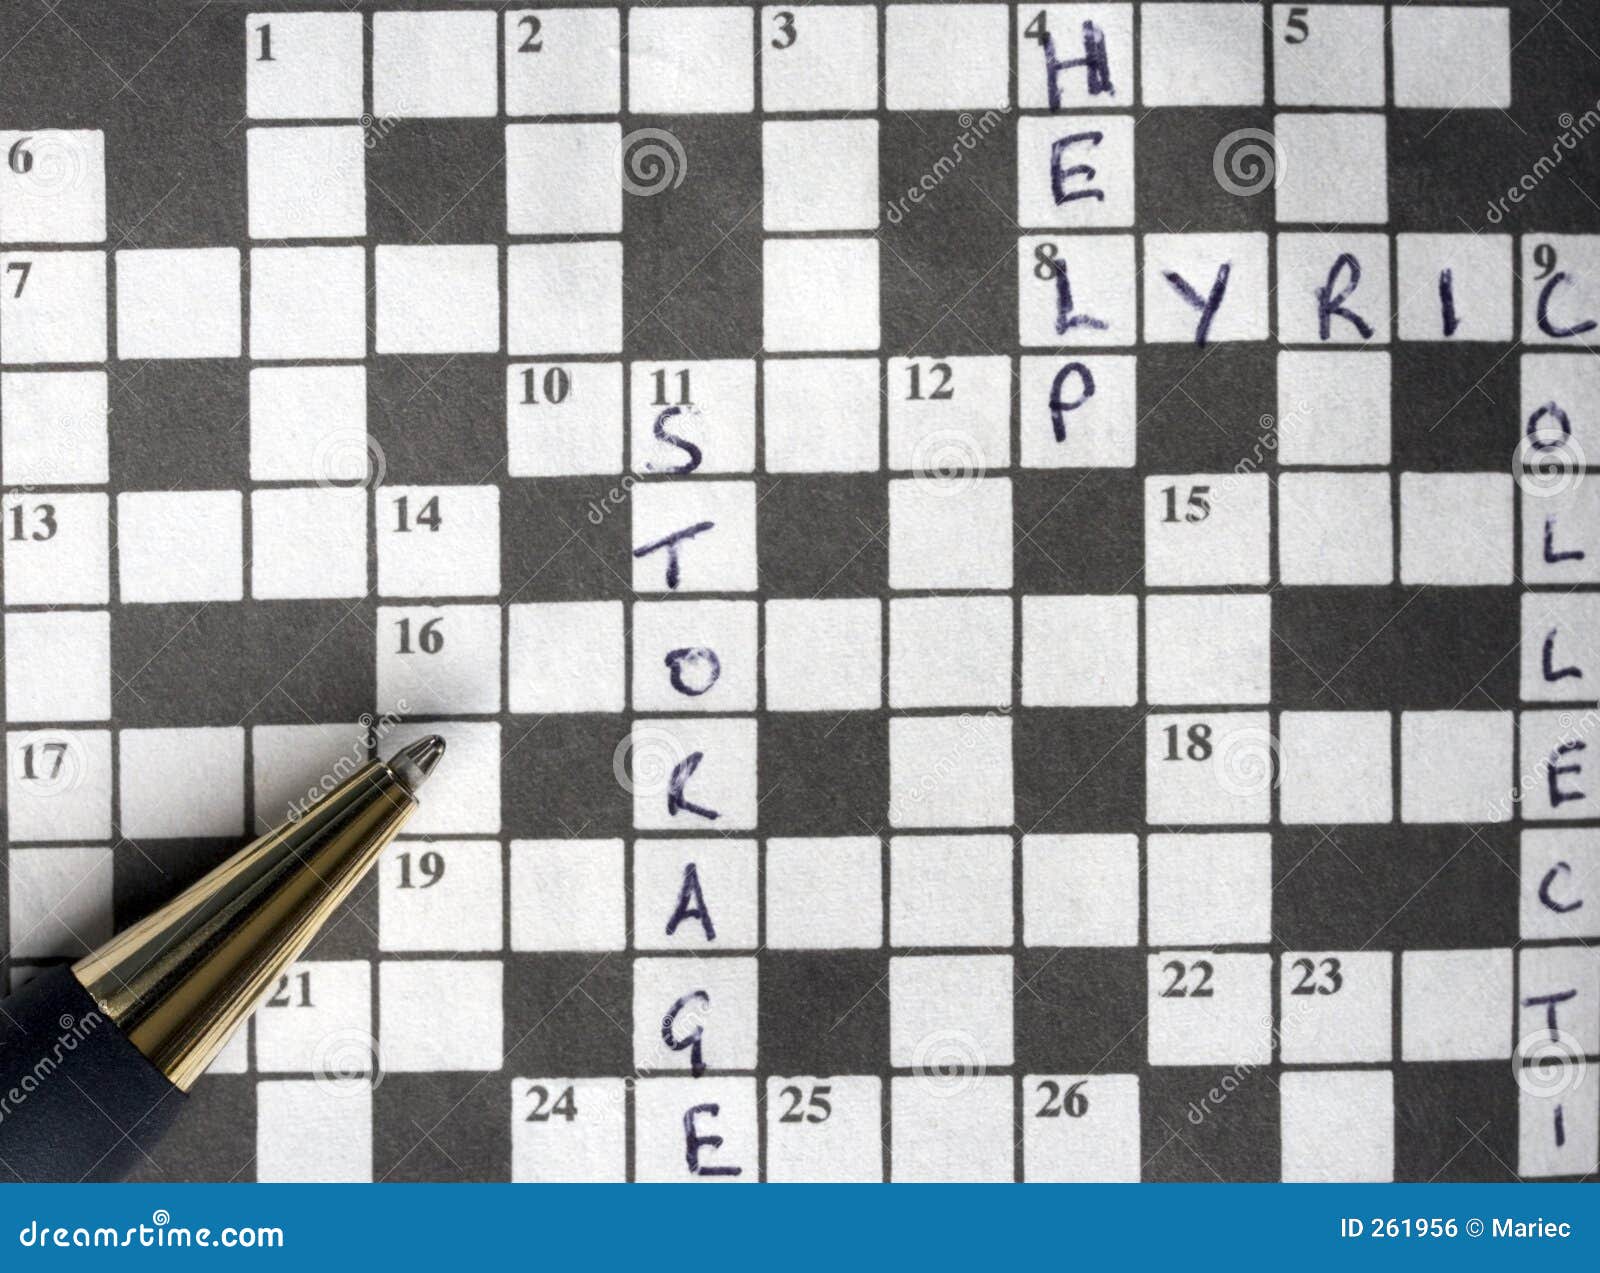 semi solved crossword puzzle with pen stock photo - image: 261956